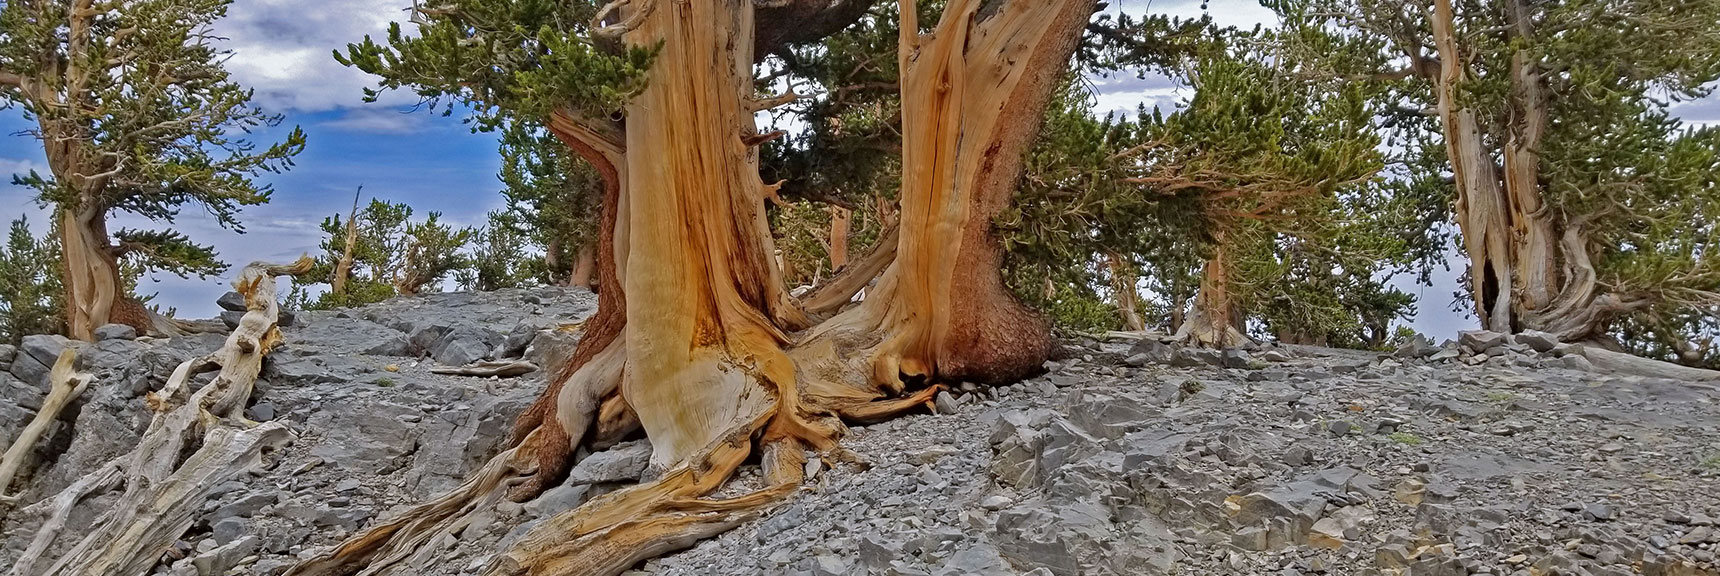 More Bristlecone Pine Sculptures on Another Plateau Viewpoint | Lee and Charleston Peaks via Lee Canyon Mid Ridge | Mt Charleston Wilderness | Spring Mountains, Nevada